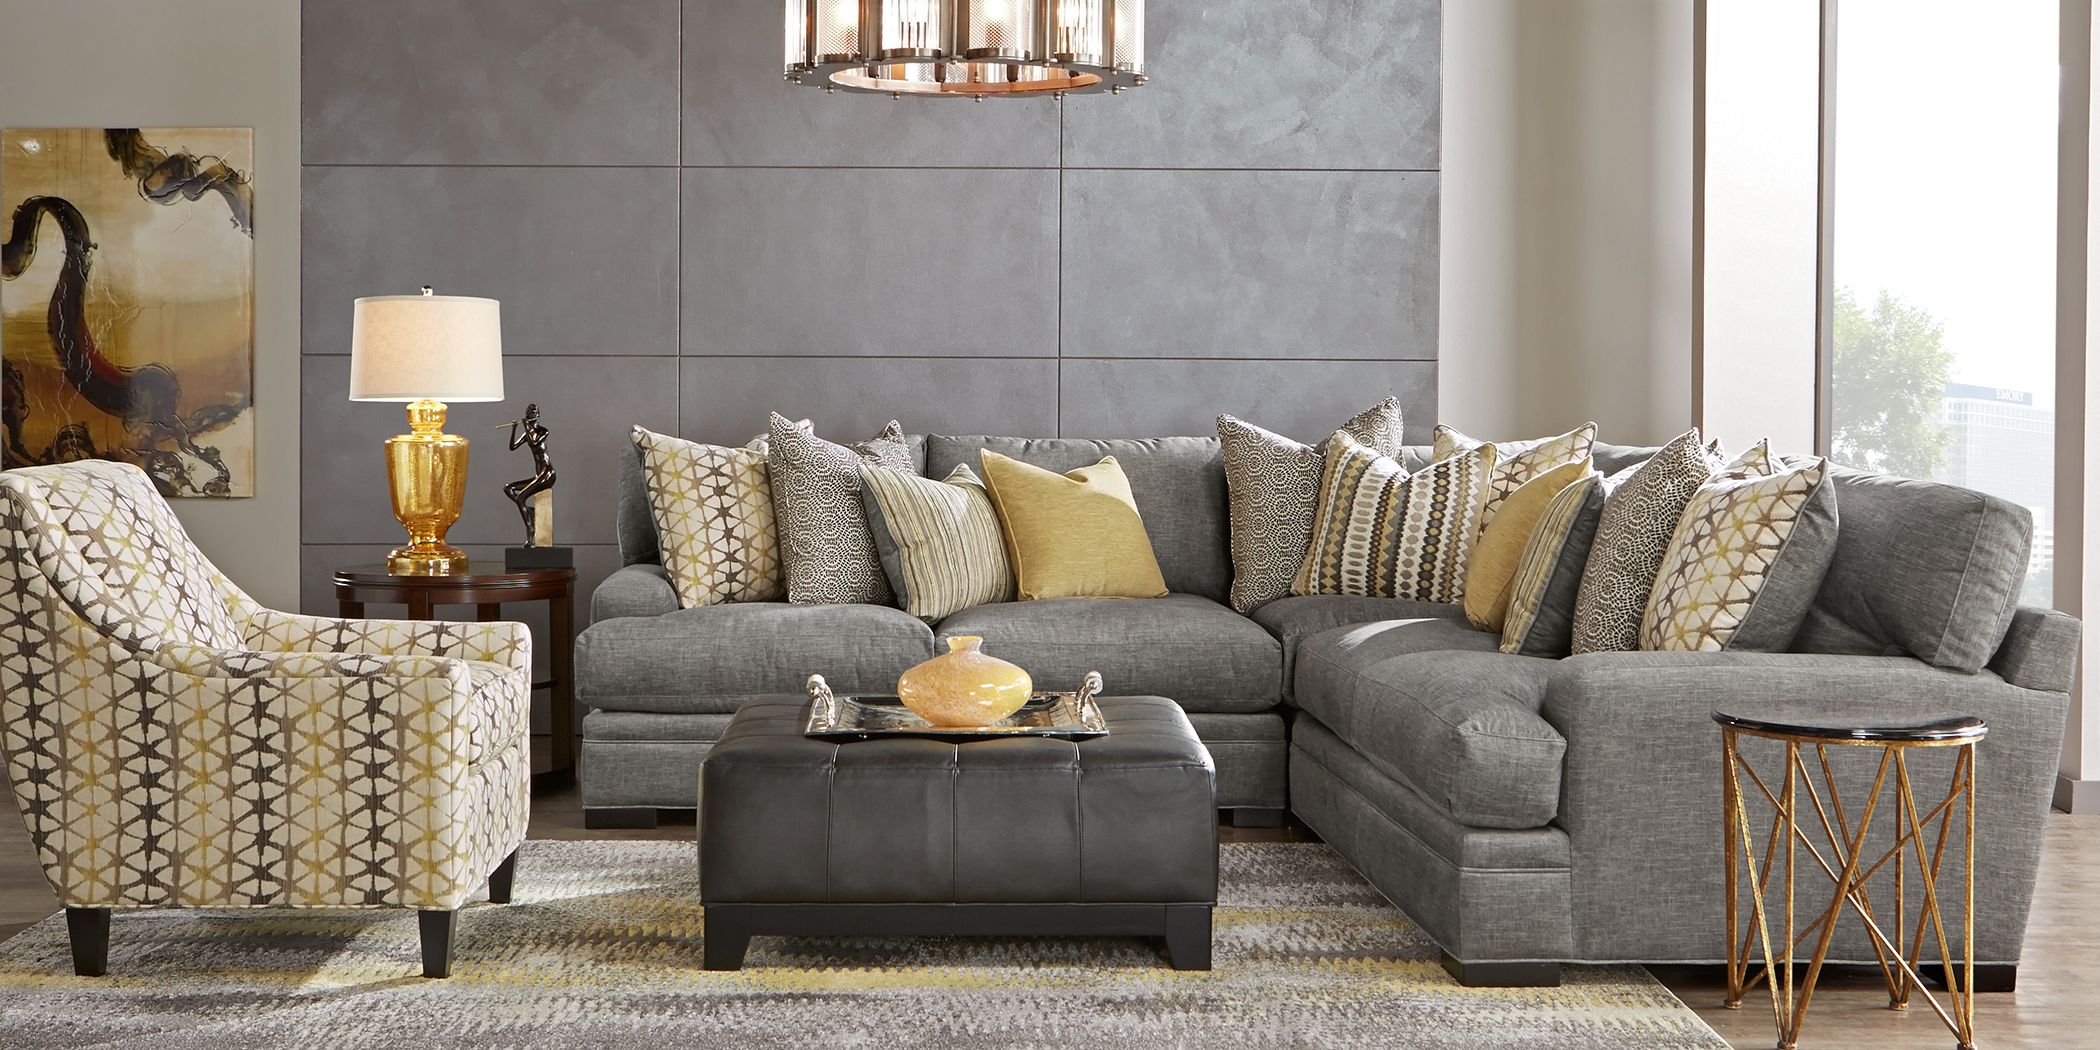 Https Wwwroomstogocom Furniture Product Cindy Crawford Home Palm Springs Gray 4 Pc Sectional Living Room 1129555P